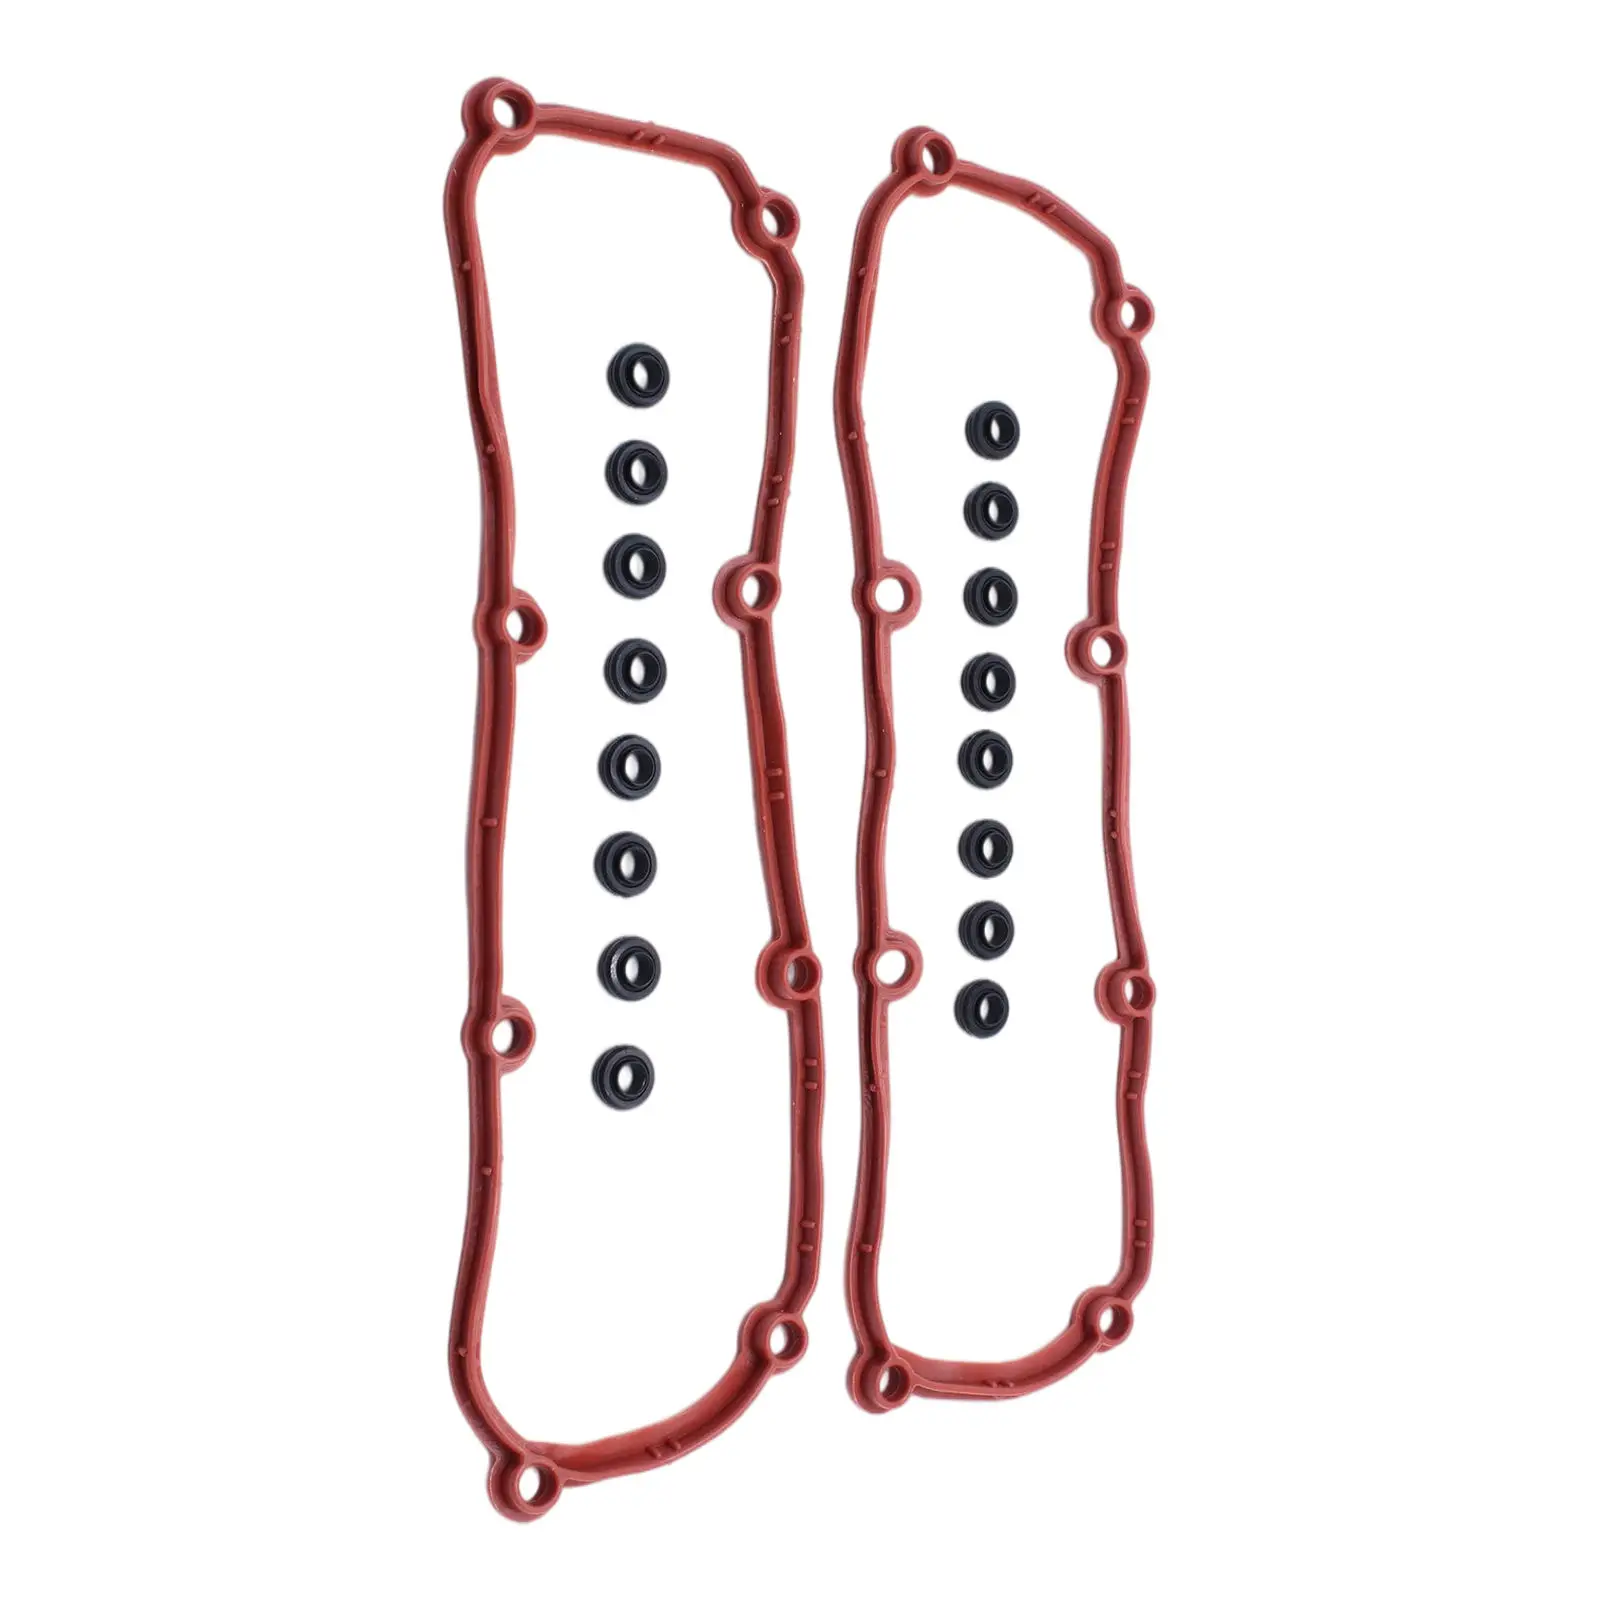 2Pcs Valve Cover Gasket Kit Fit for Grand Caravan Town & Country 12V